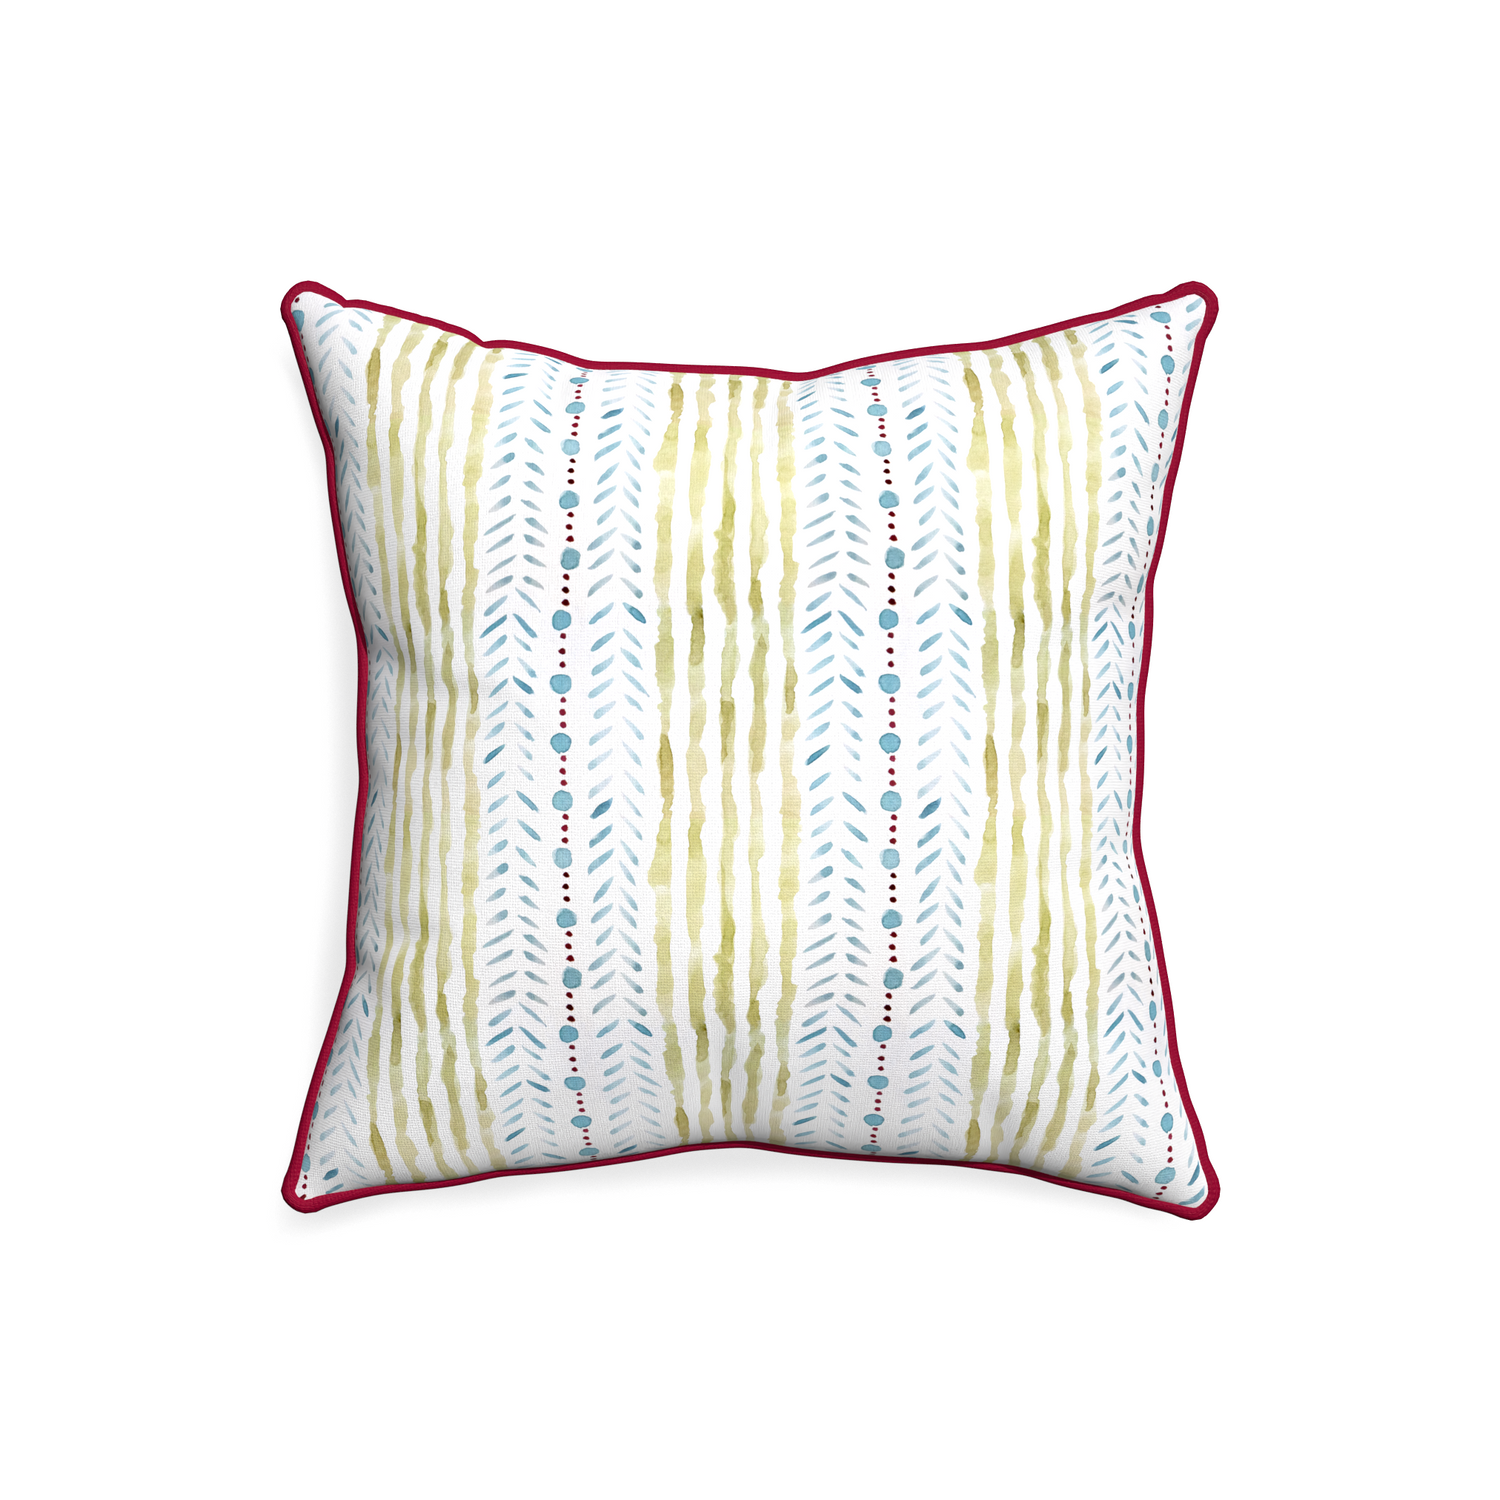 20-square julia custom pillow with raspberry piping on white background